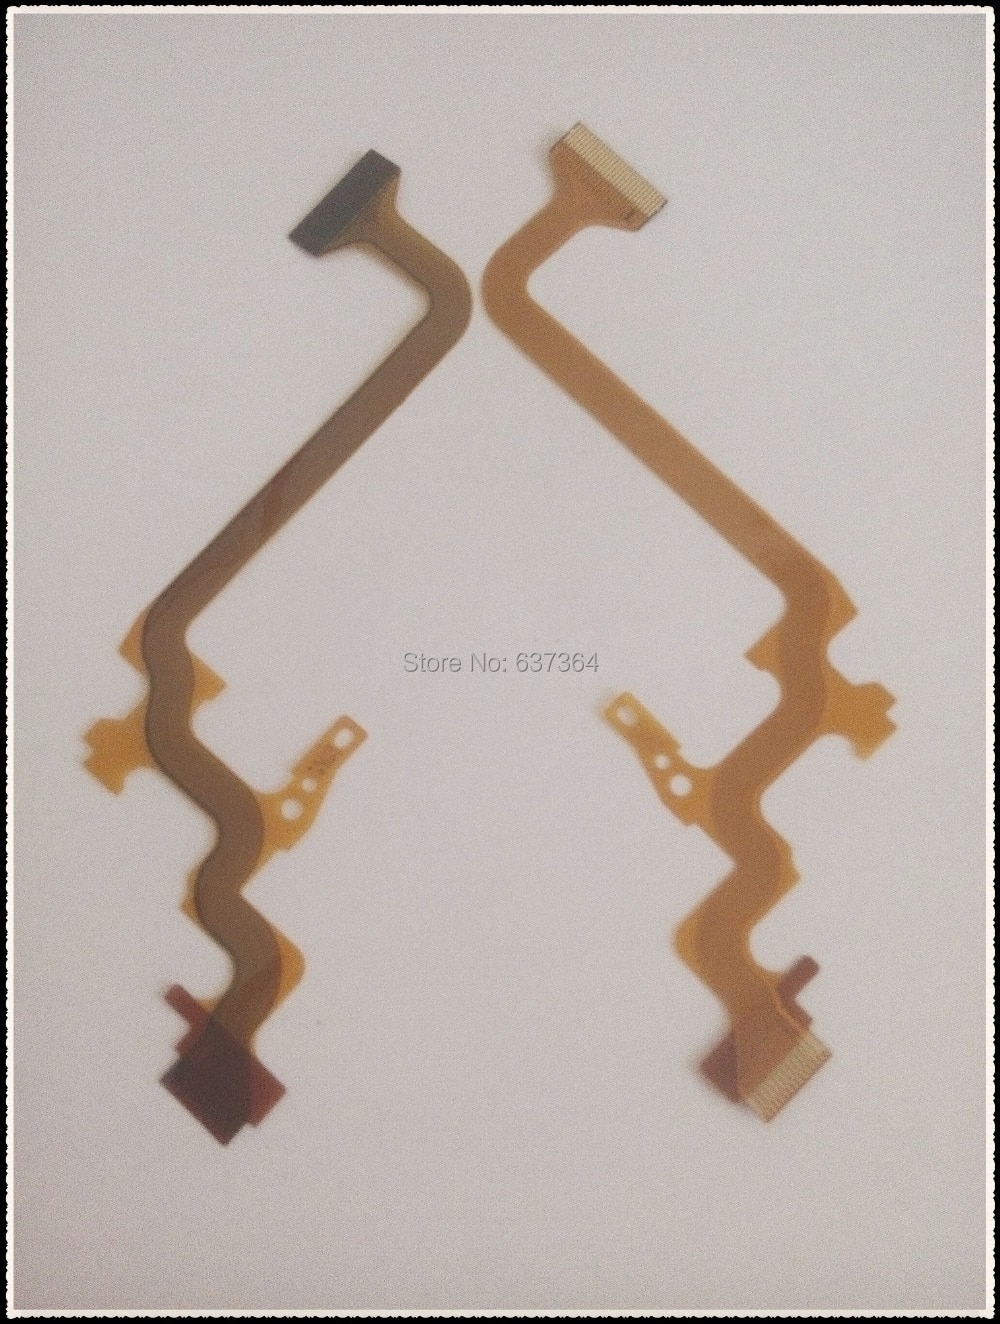 NEW Repair Parts For JVC GZ-MS215 GZ - MS215 MS230 HM320 HM300 HM330 HM550 MG750 HD620 HD520 HD660 LCD Flex Cable